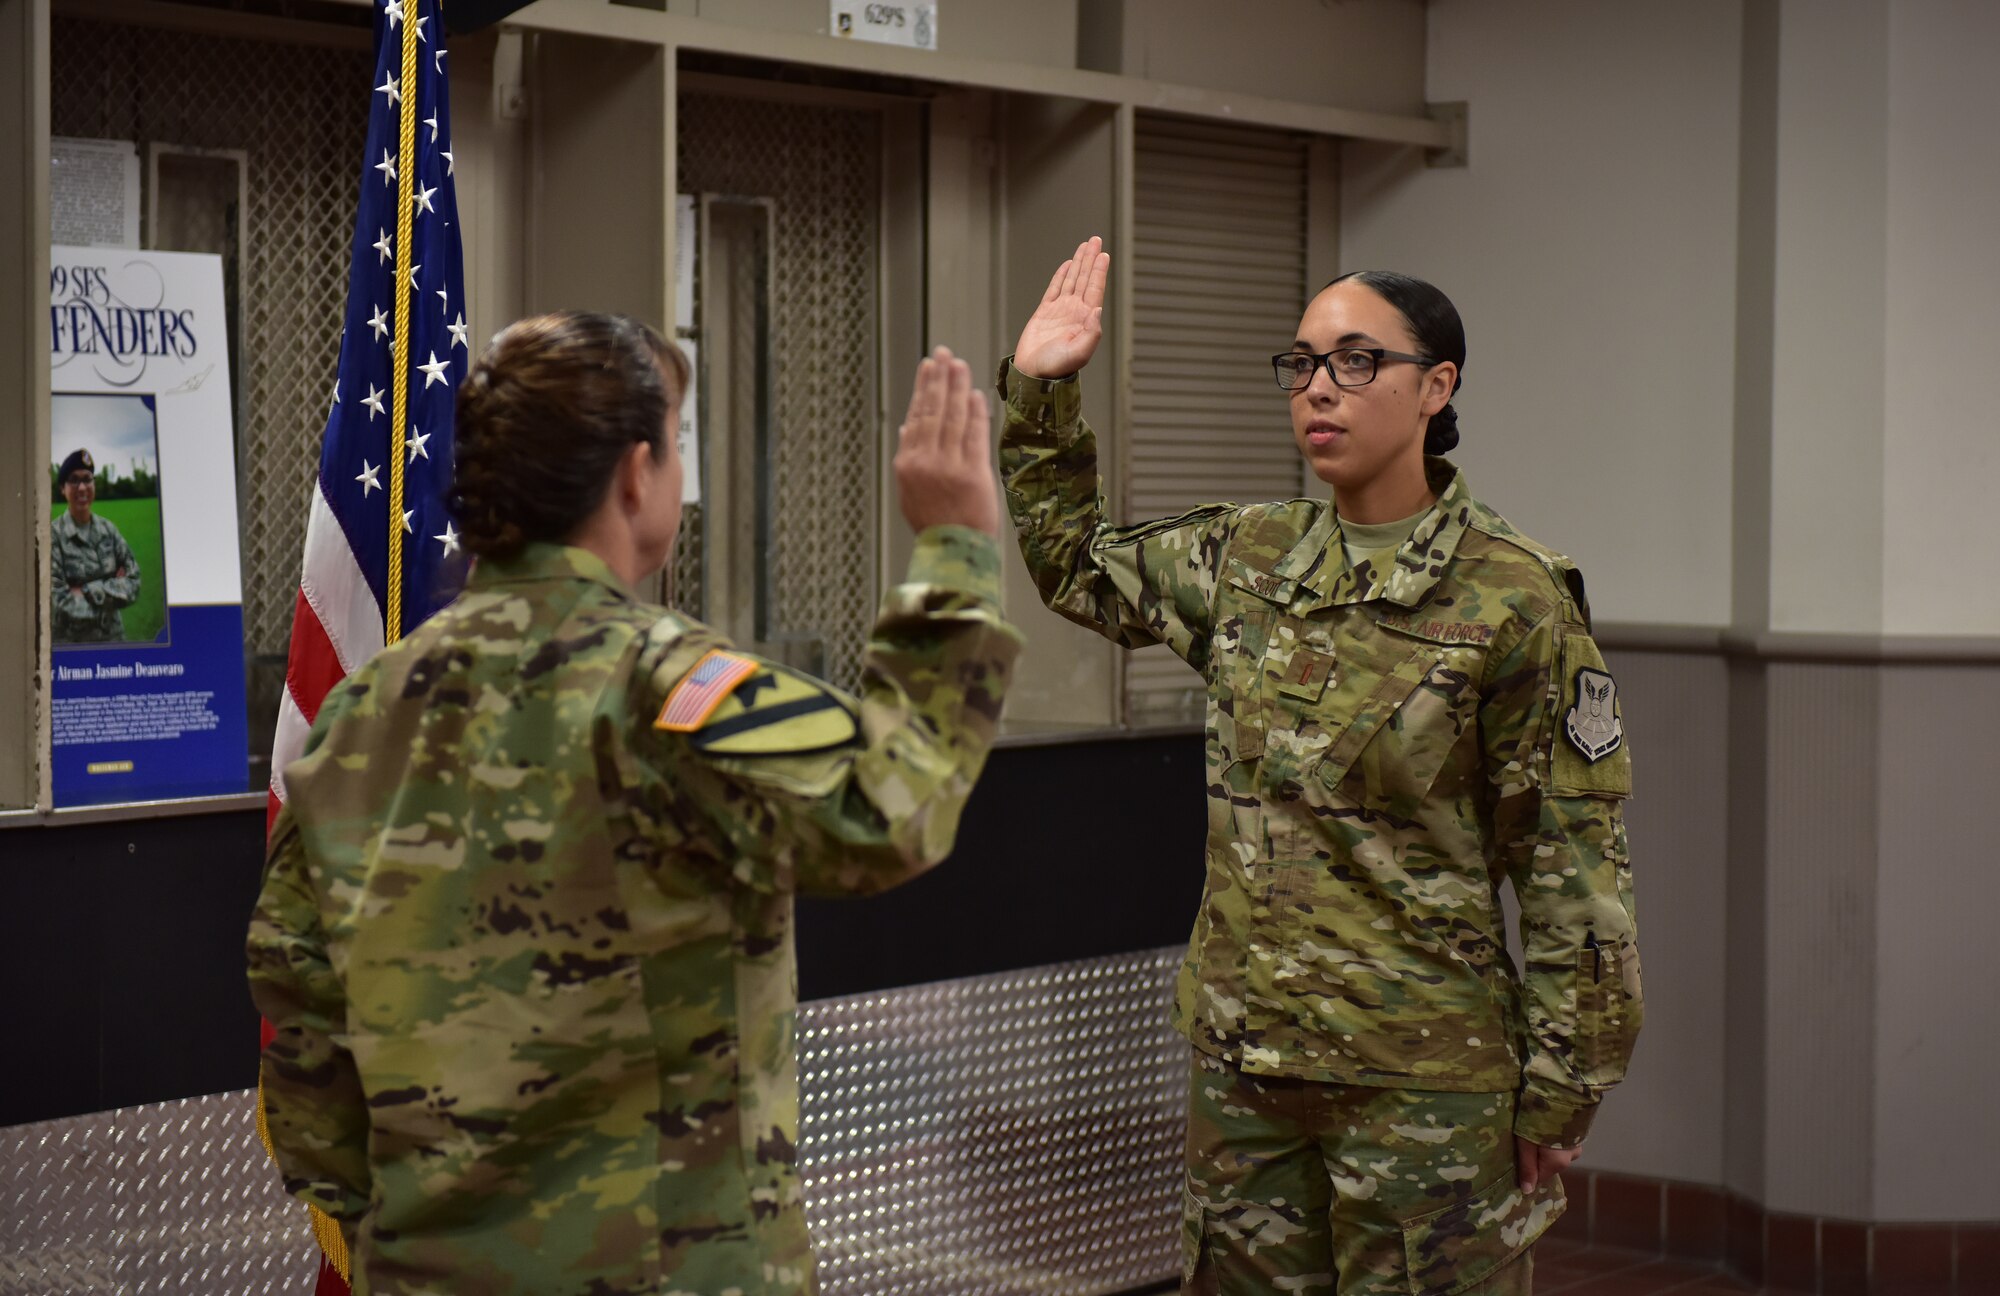 U.S. Army Maj. Darla Deauvearo, left, administers the oath of office to her daughter 2nd Lt. Jasmine Scott, Aug. 10, 2018, at Whiteman Air Force Base. Scott was a member of the 509th Bomb Wing and commissioned into the medical services field.  (U.S. Air Force photo by Tech. Sgt. Alexander W. Riedel)